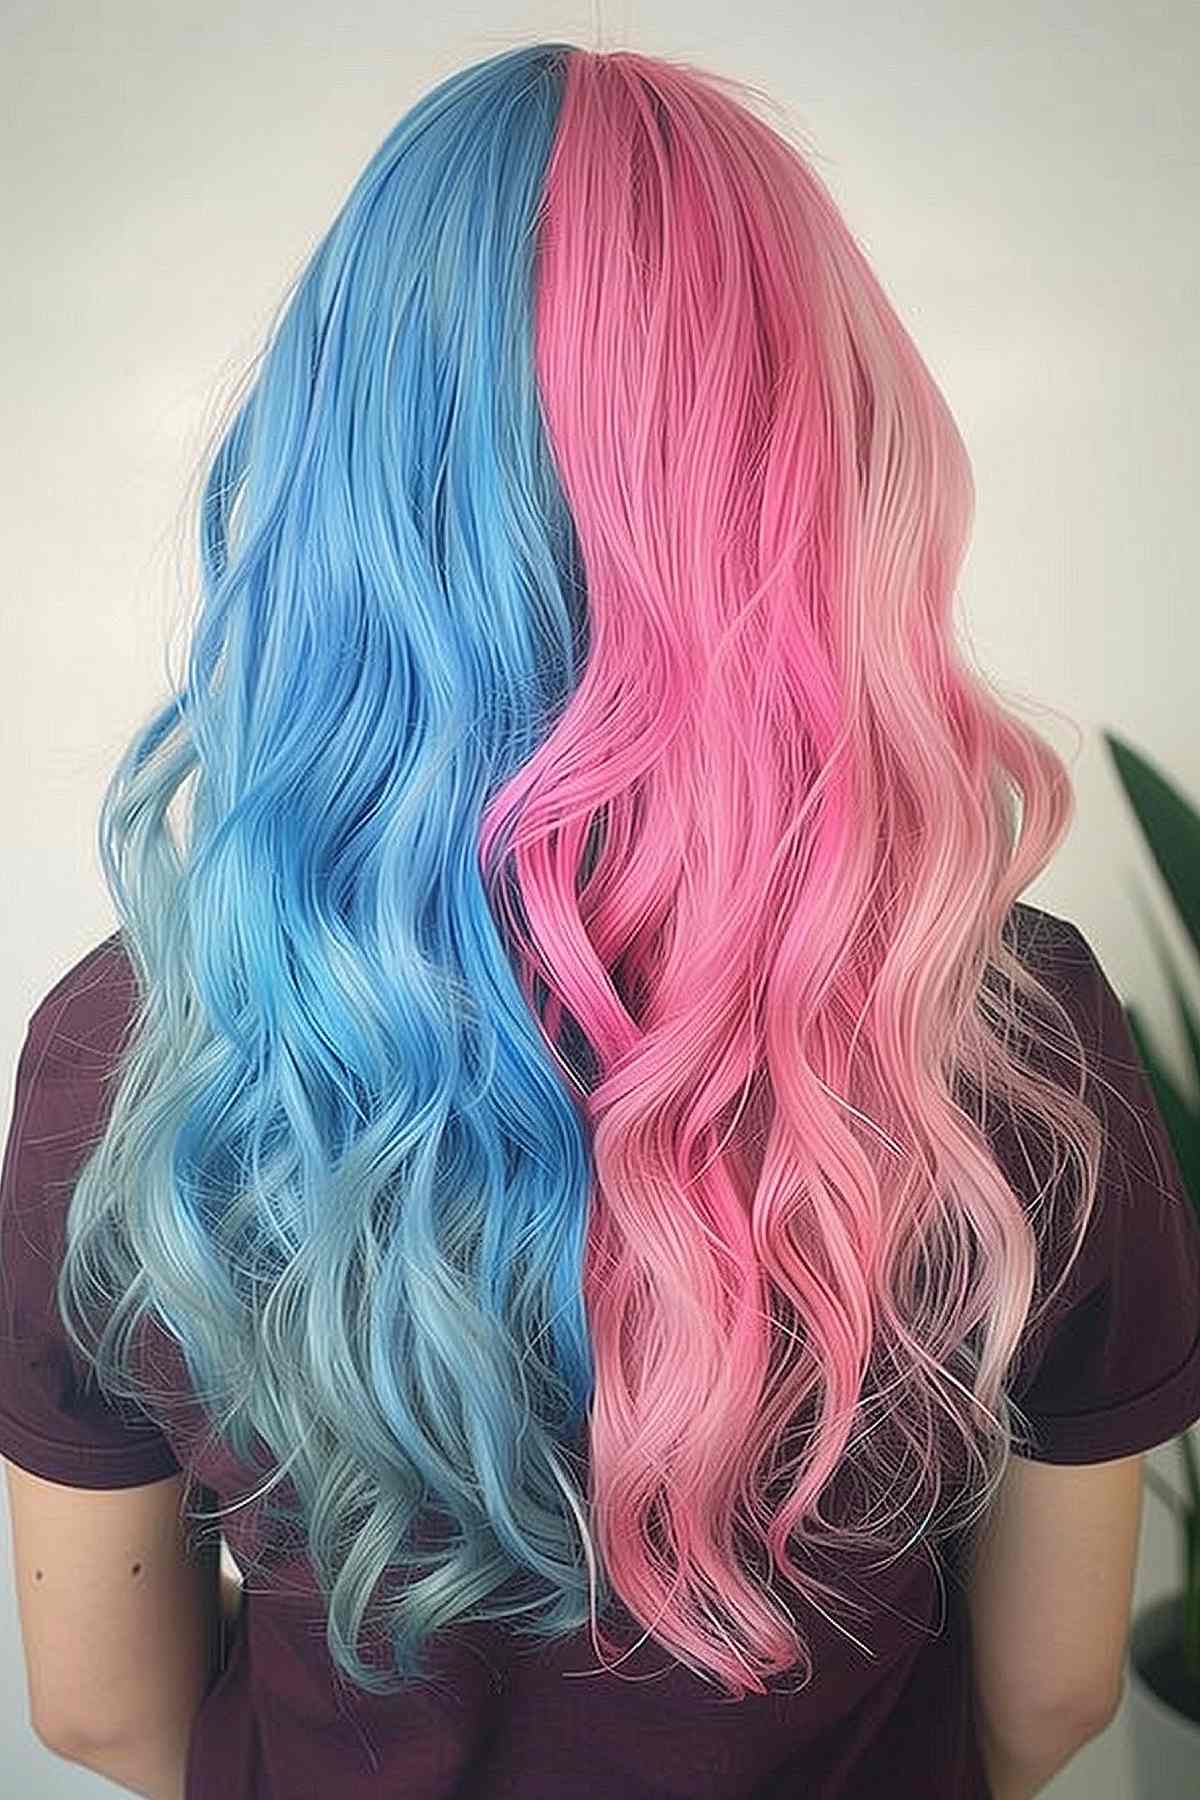 Wavy mid-back hair in pastel blue and pink, embodying a whimsical and airy Gemini-inspired style.